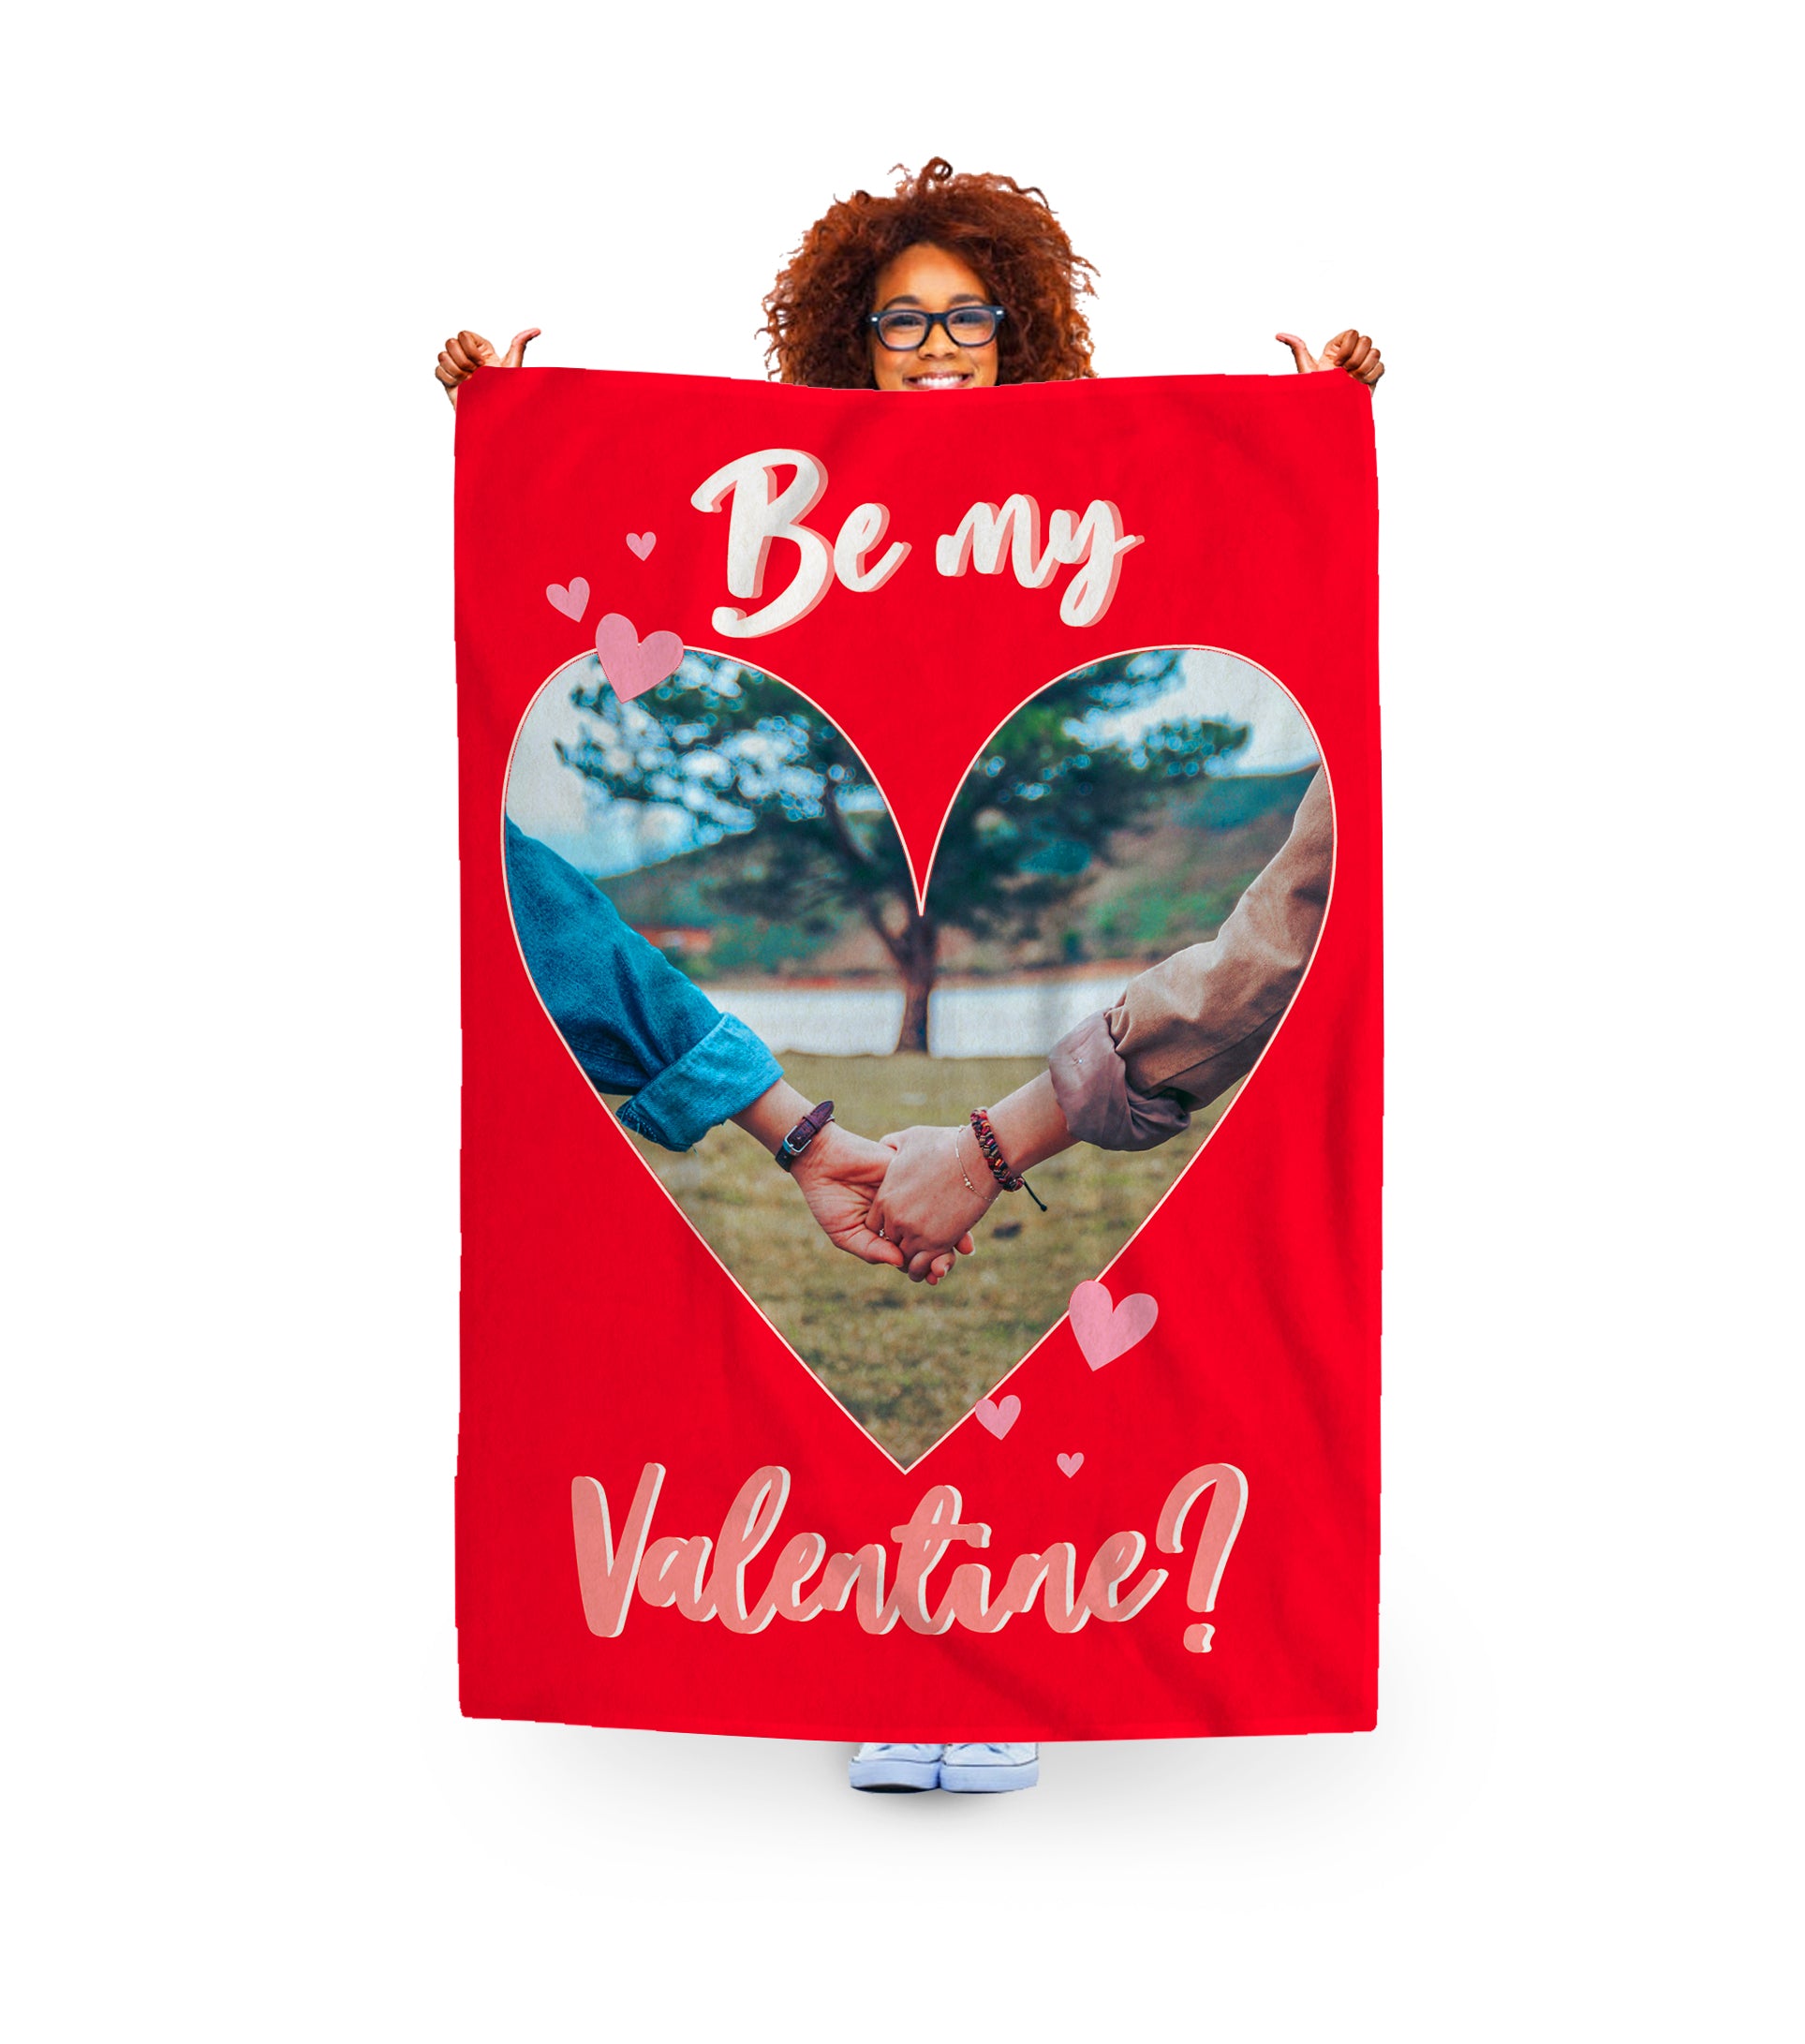 woman holding valentines photo blanket. couple photo and text. heart shaped images.